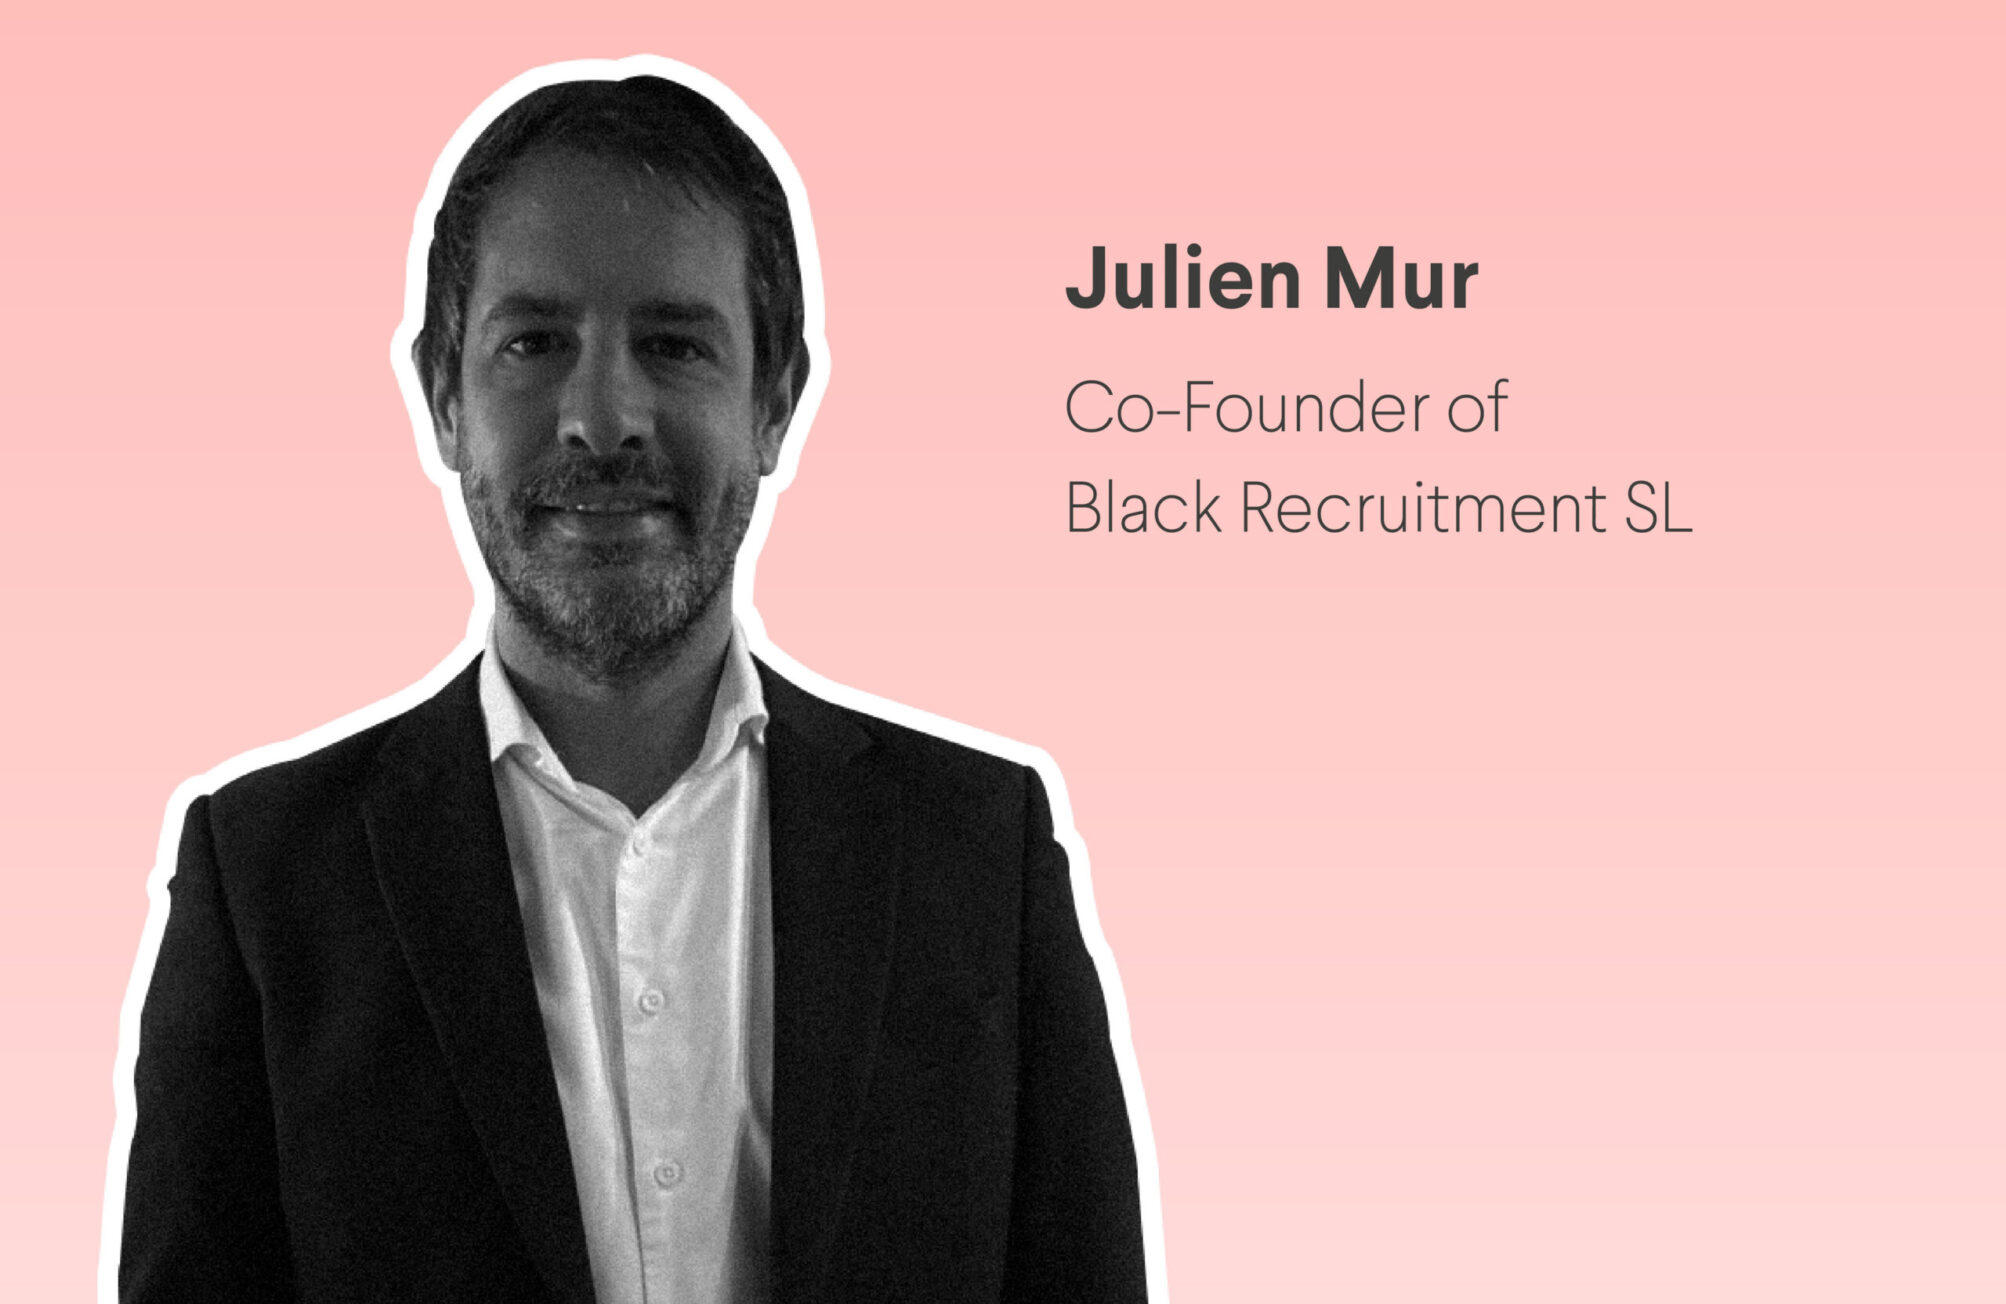 Julien Mur: “Be clear and transparent: DO NOT sell what is not there”.